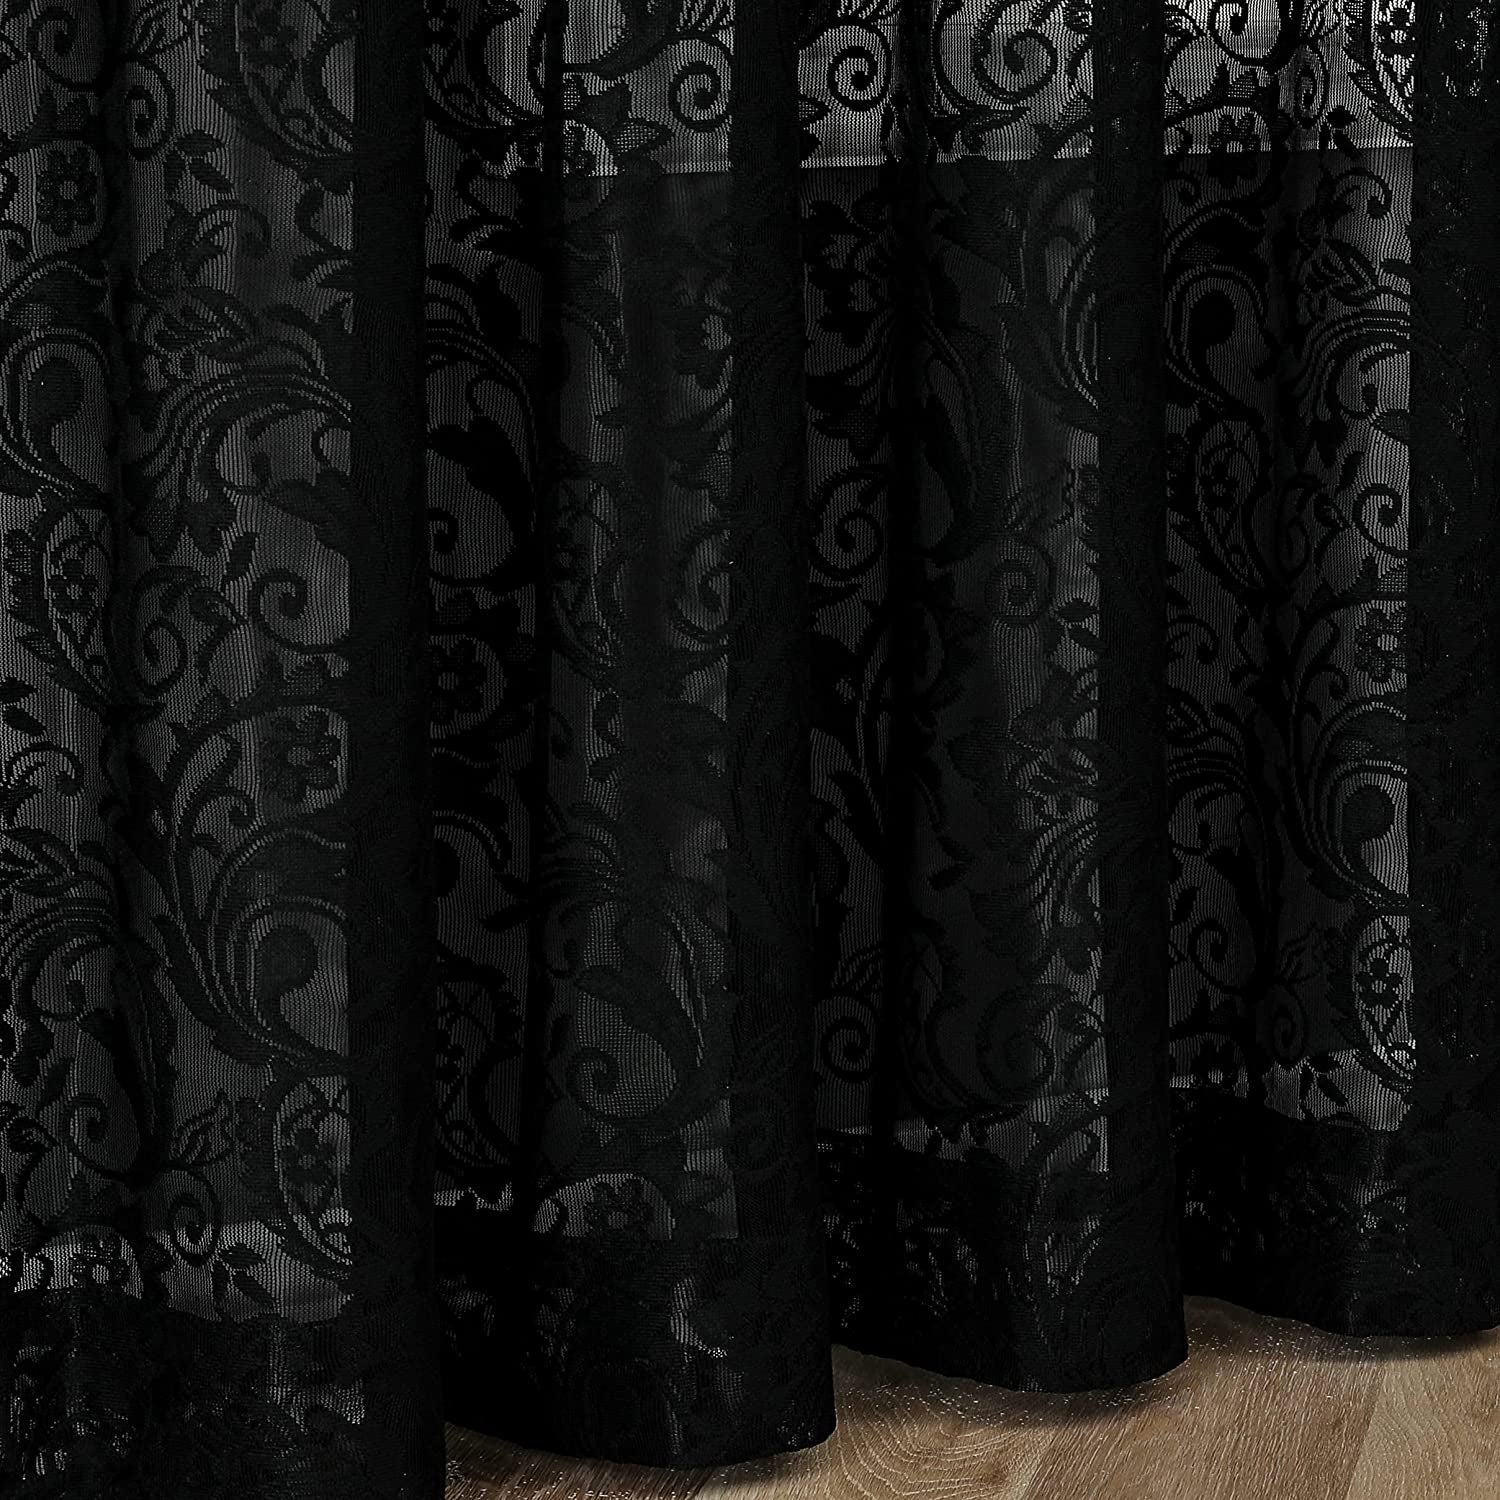 Black Sheer Lace Curtains 84 Inch Vintage Floral Sheer Gothic Curtain Panels for Living Room Bedroom Luxury Light Filtering Drapes Black Window Treatment Sets Rod Pocket 2 Panels 54" Wx84 L  Bujasso   